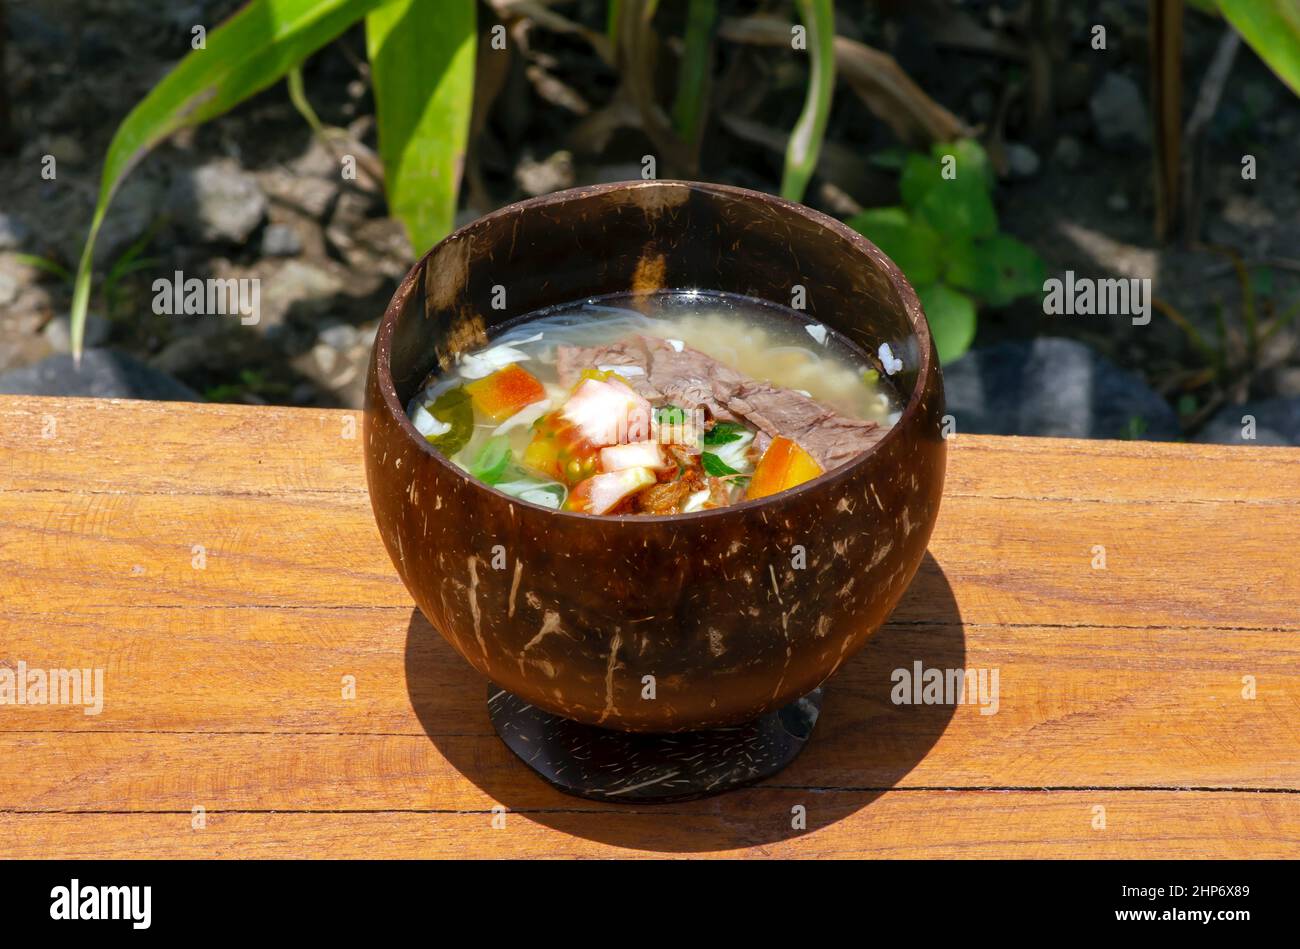 Soto Batok, a Javanese beef soup with vegetables and rice, served in a traditional bowl made of coconut shell Stock Photo